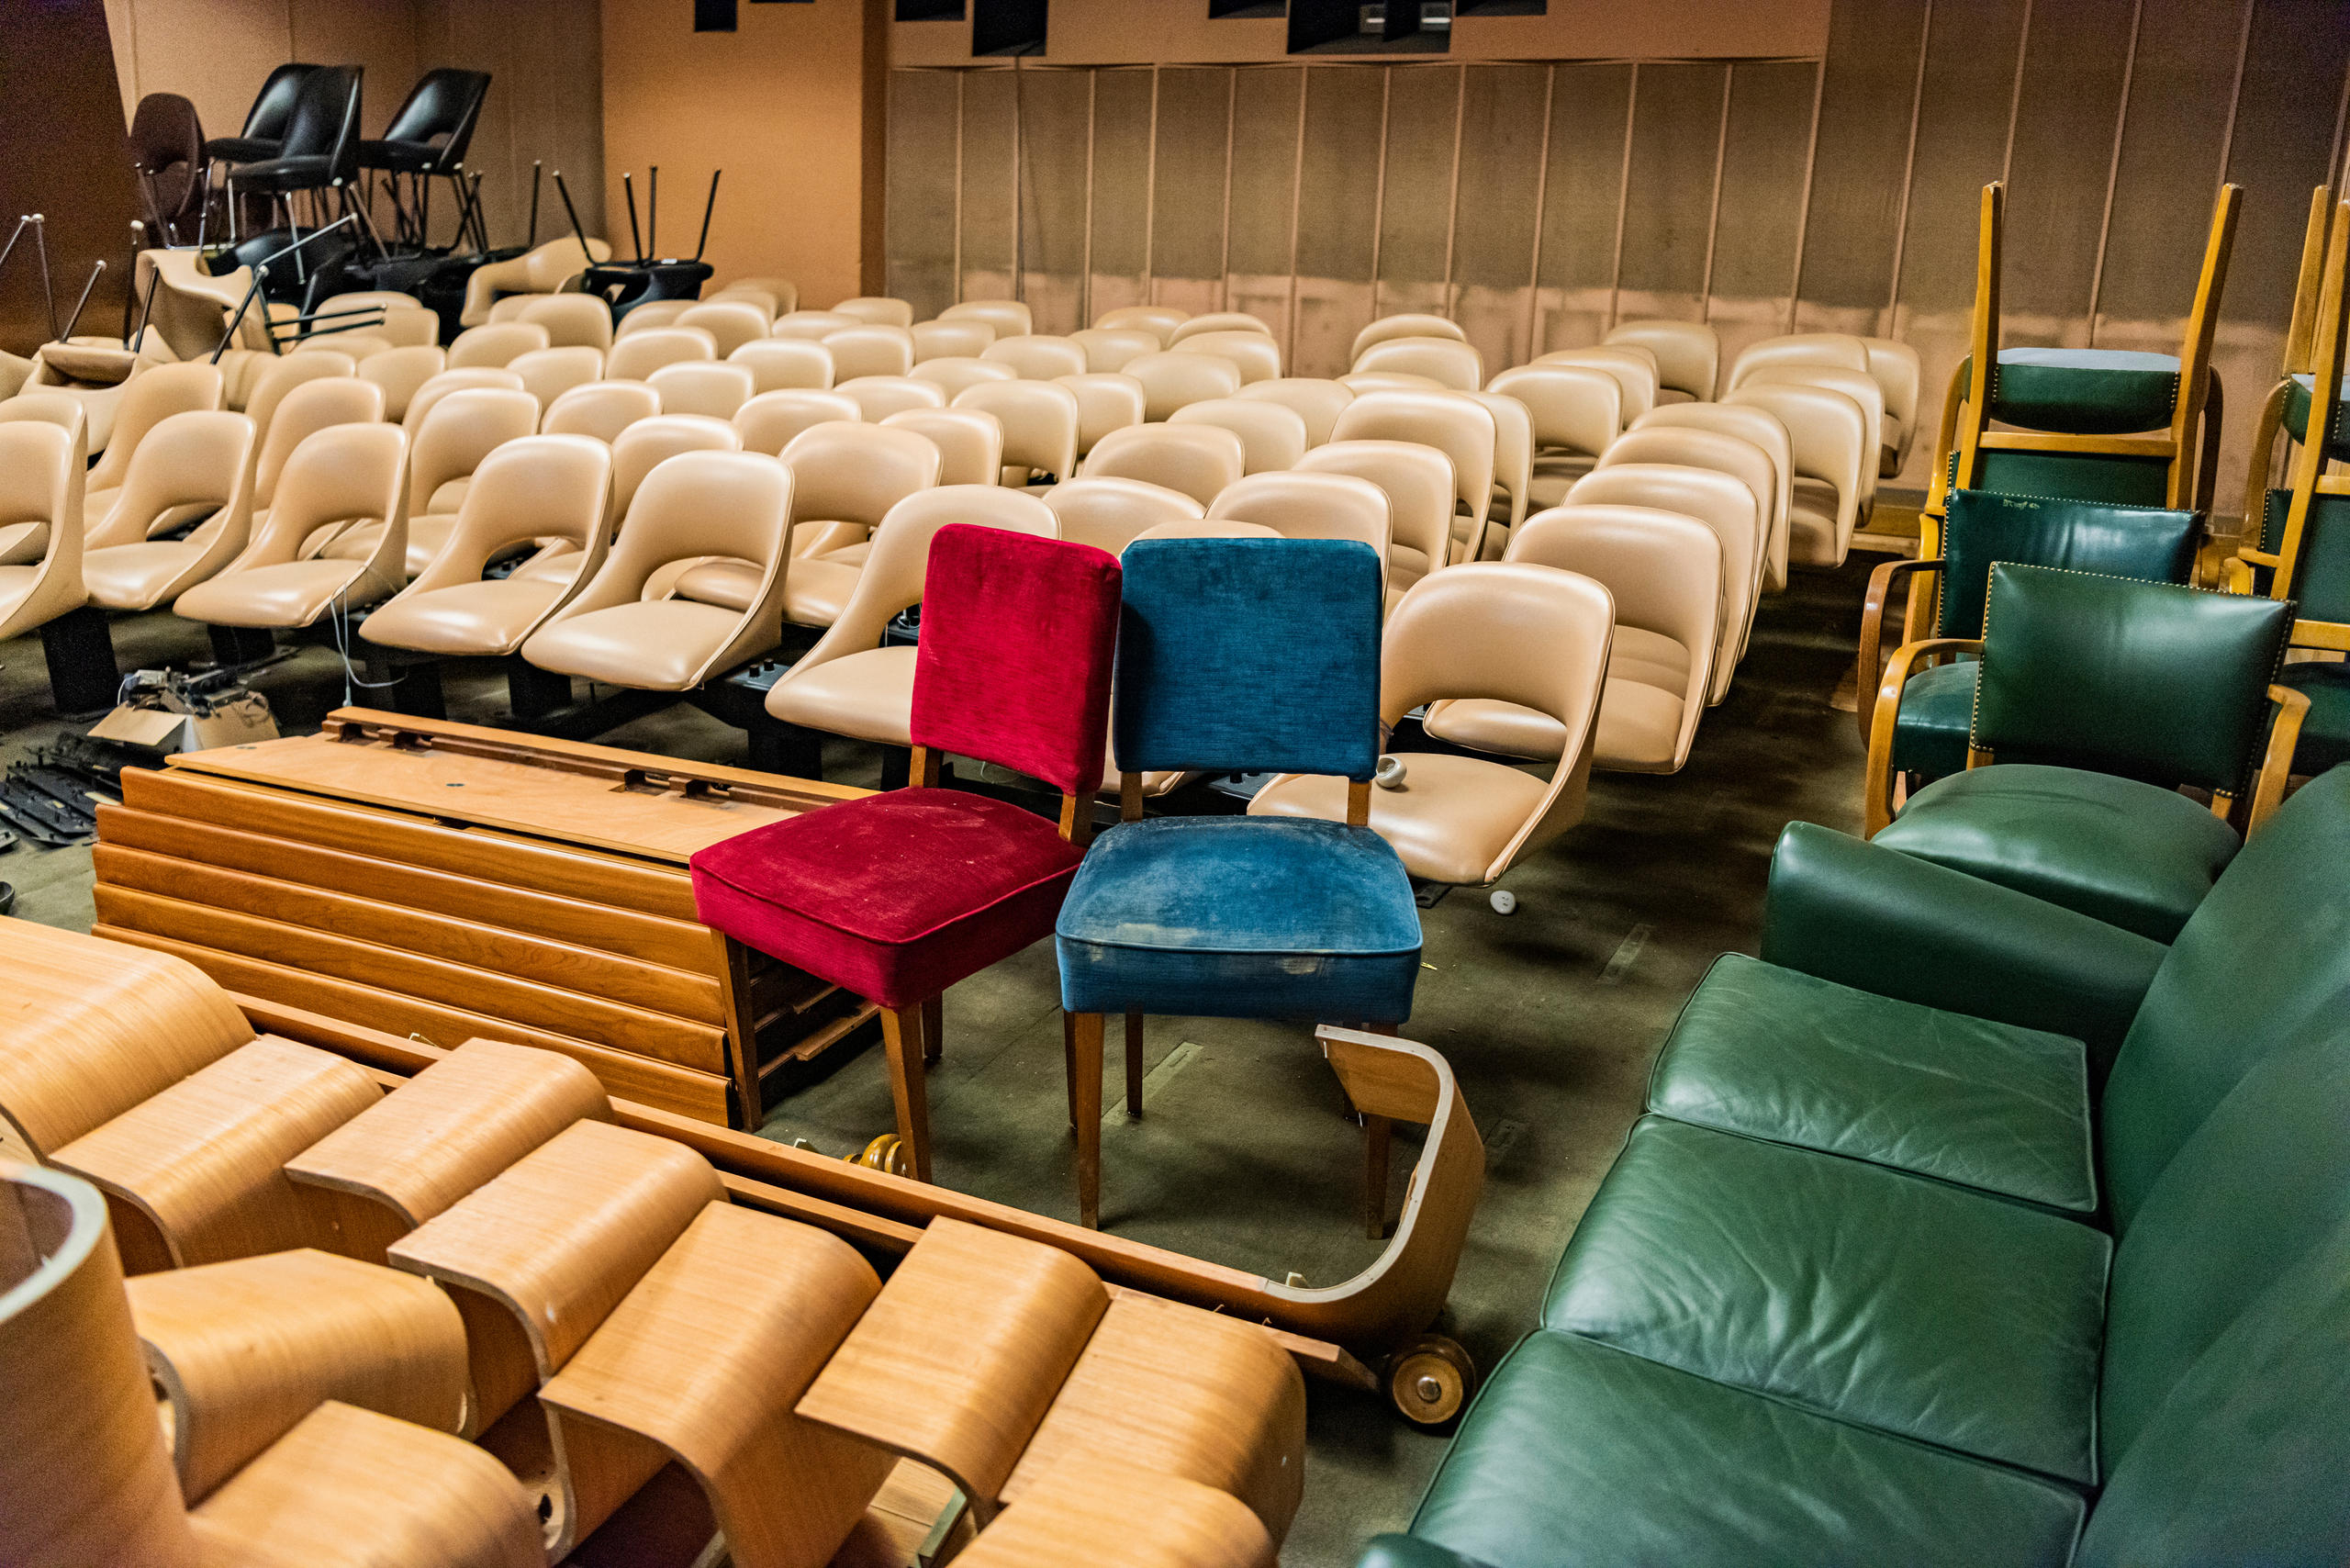 A mixed assortment of chairs stocked in a basement cinema.